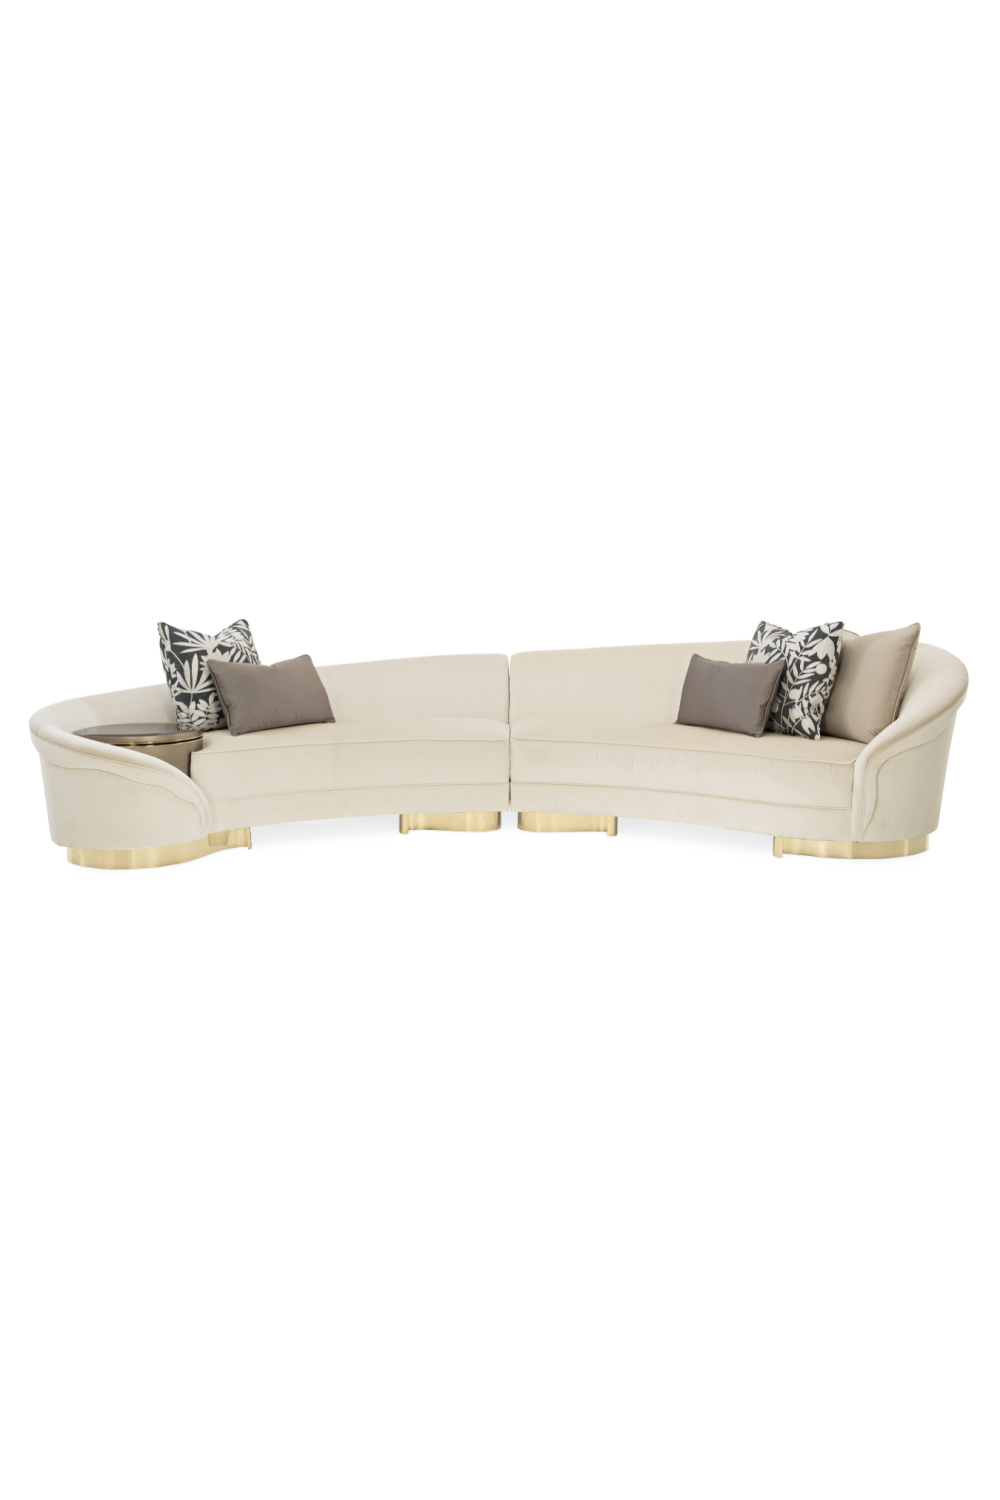 Curved Modern Sectional Sofa | Caracole Grand Opening | Oroa.com